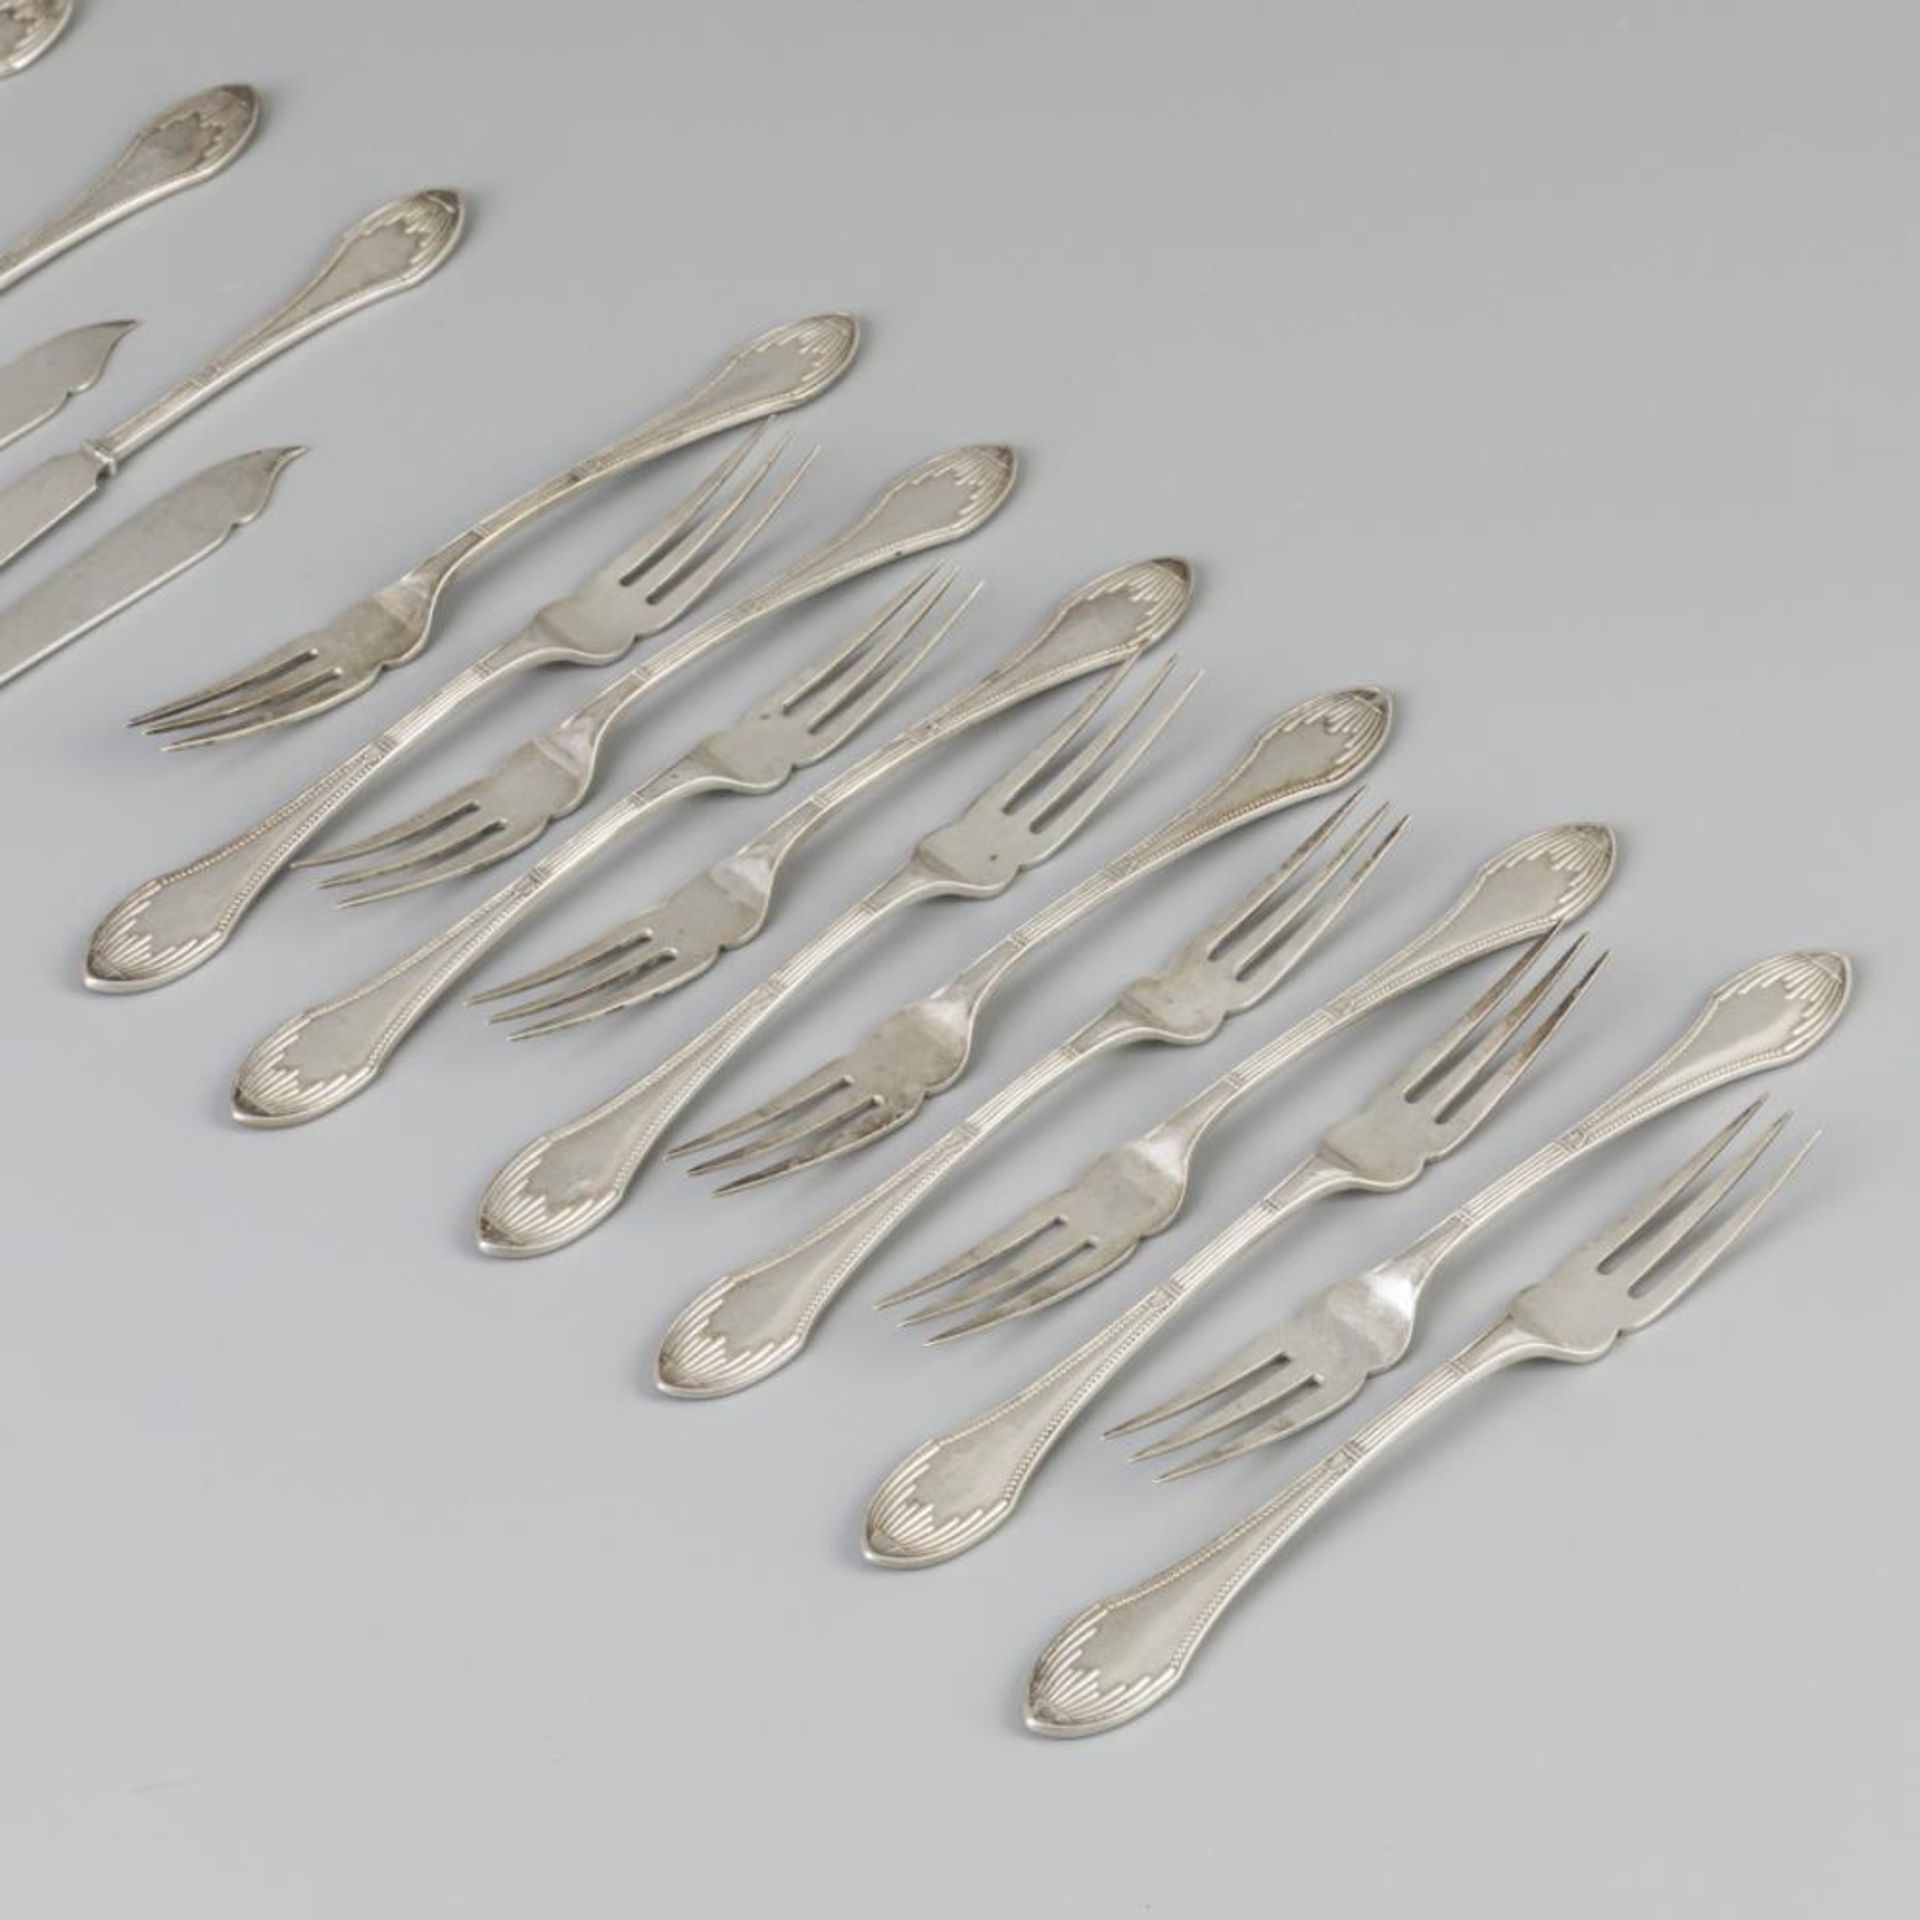 24 piece set silver fish cutlery. - Image 2 of 5